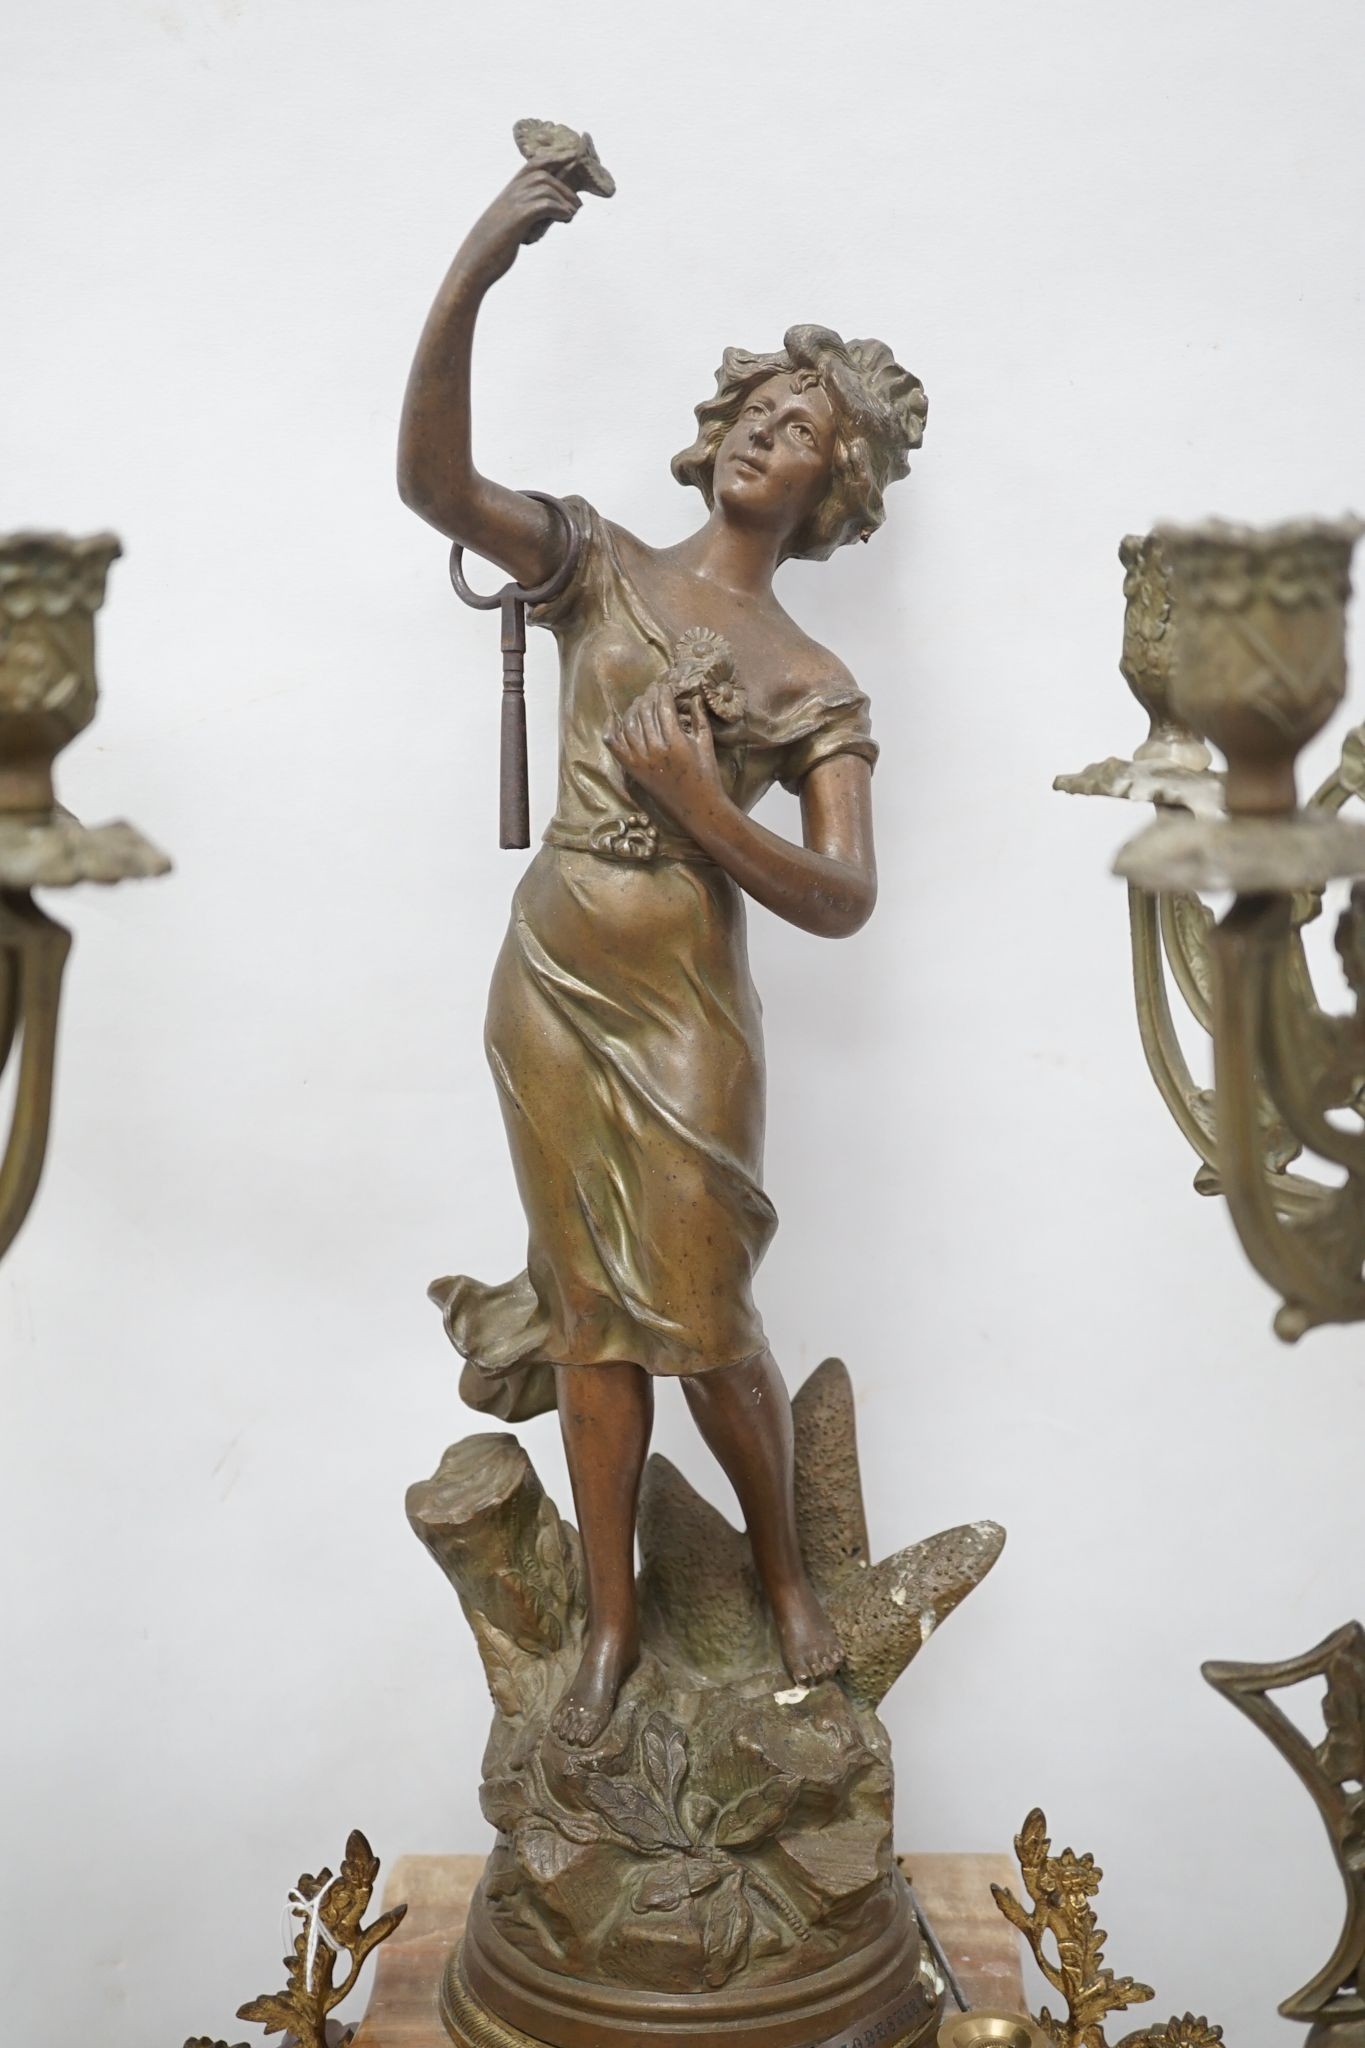 A French onyx and spelter figural clock garniture 66cm